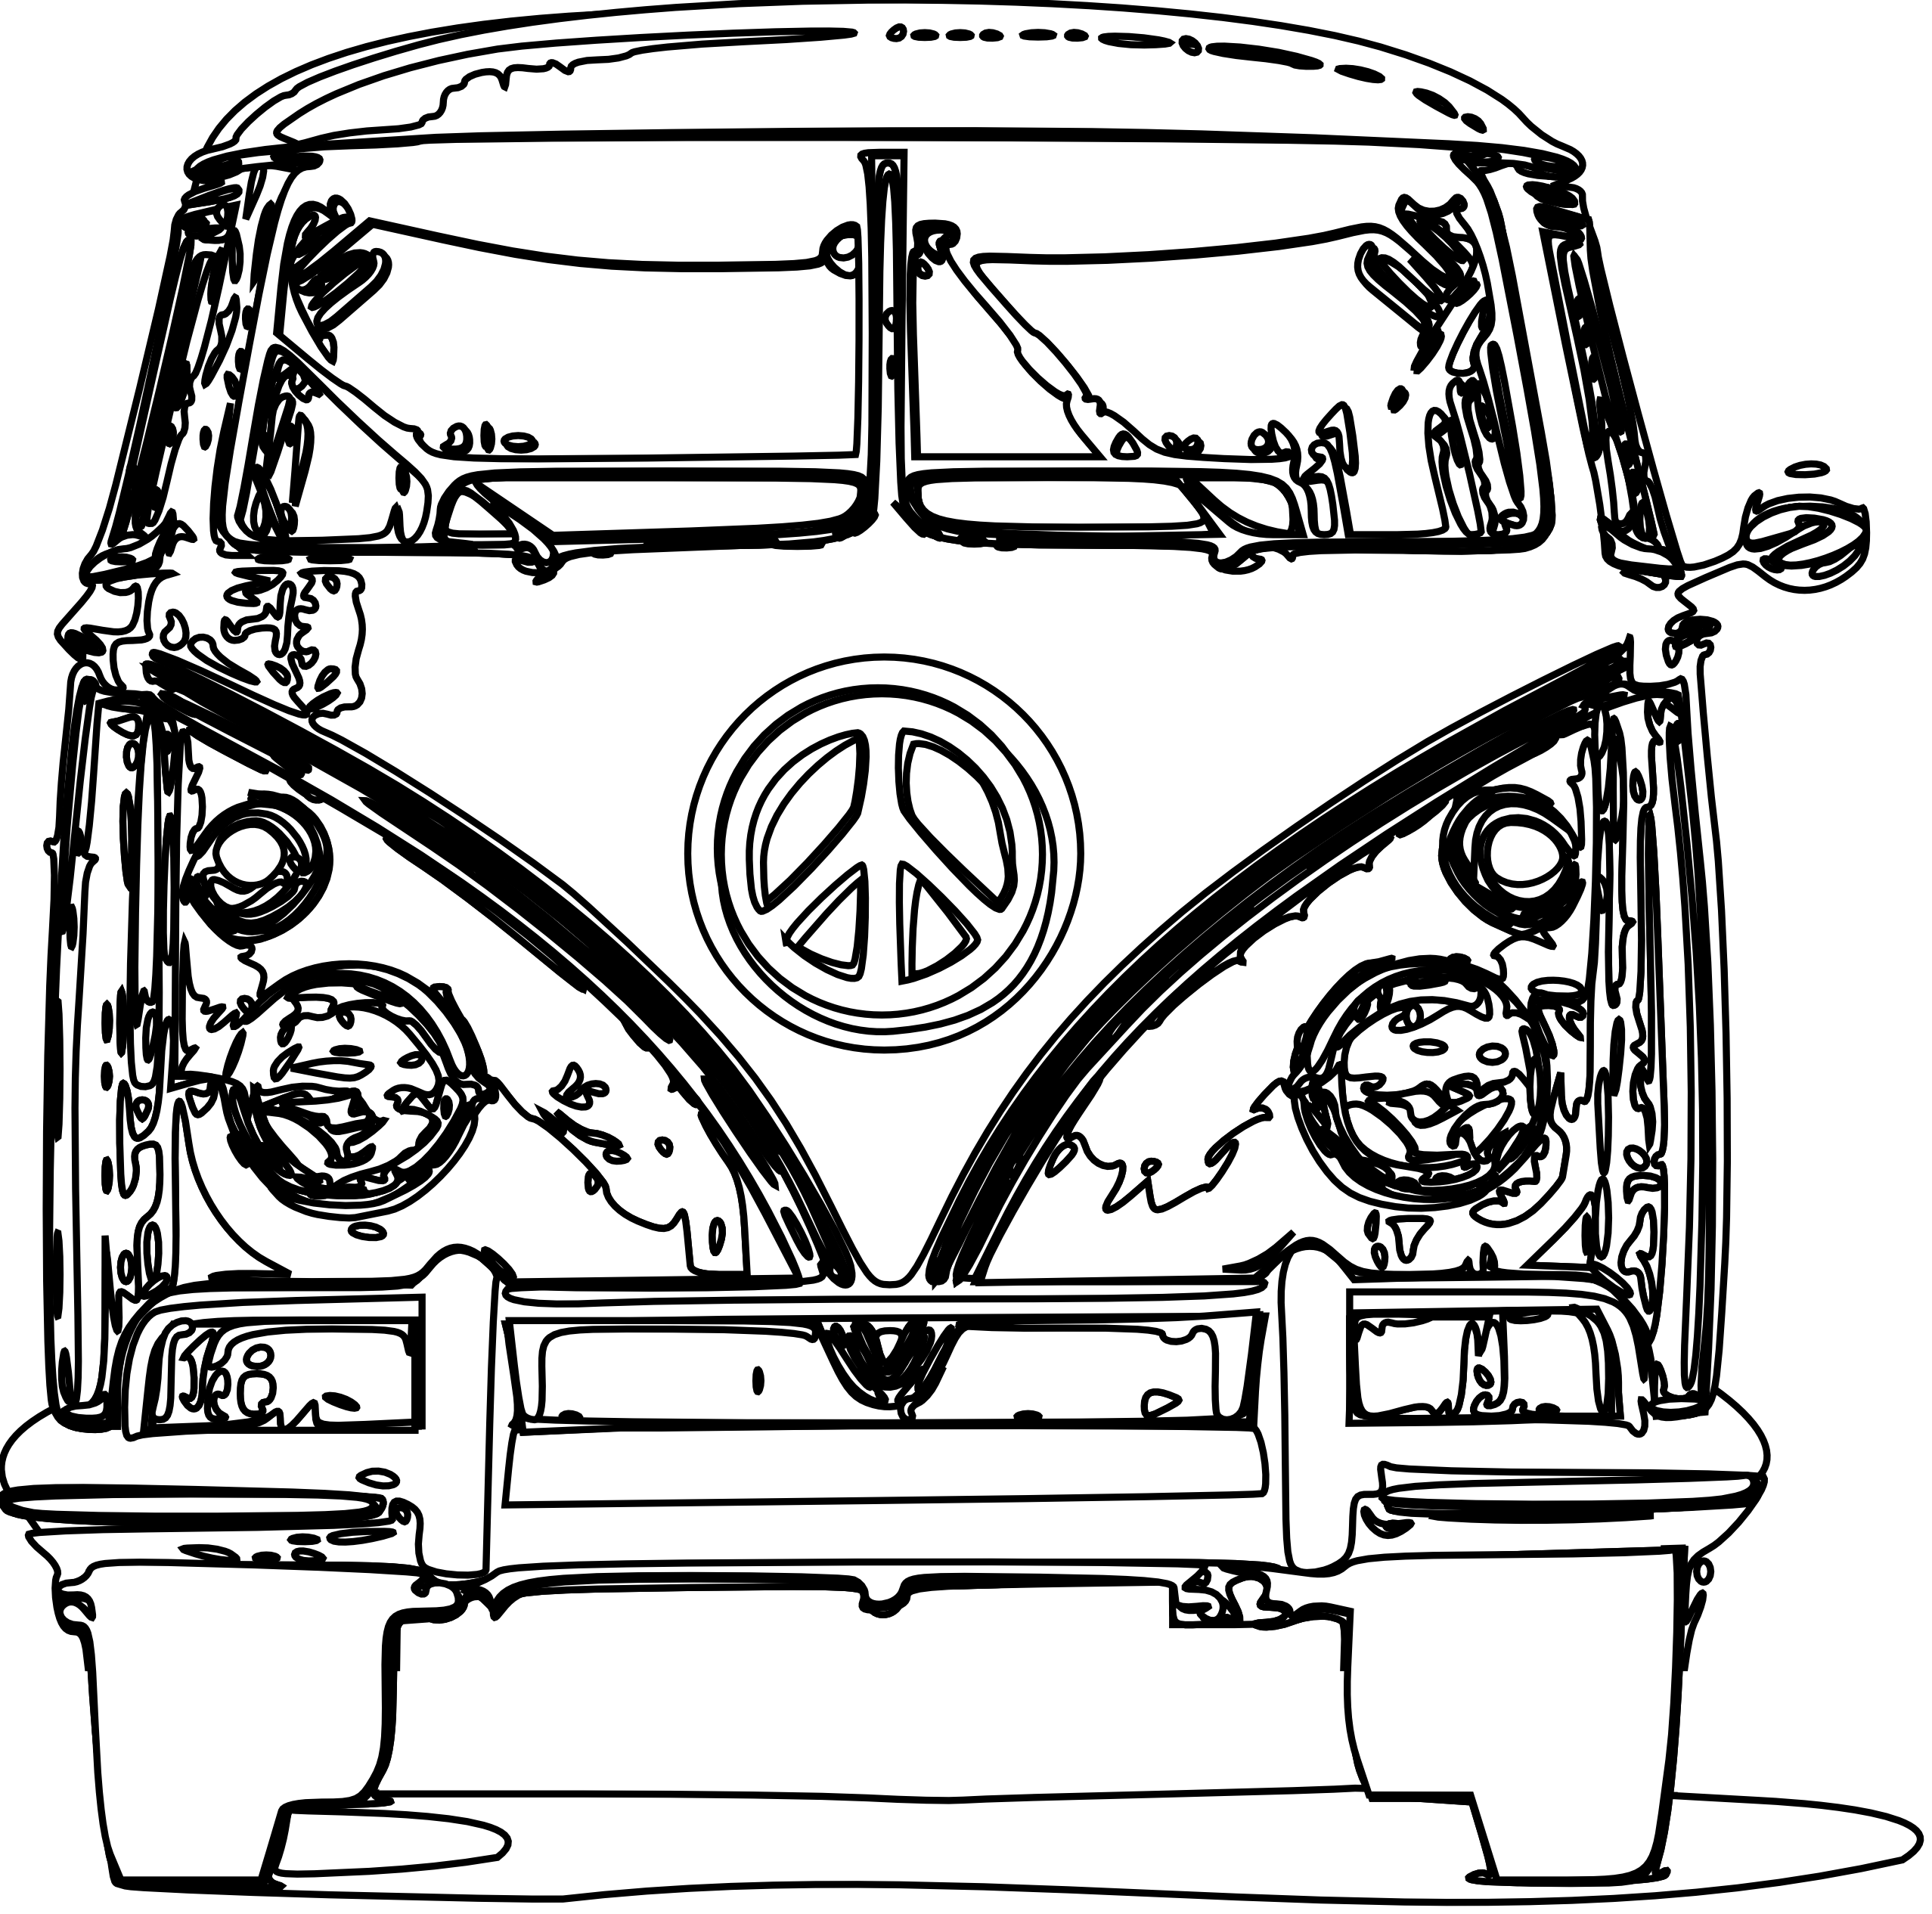 Images For > Vw Bus Cartoon